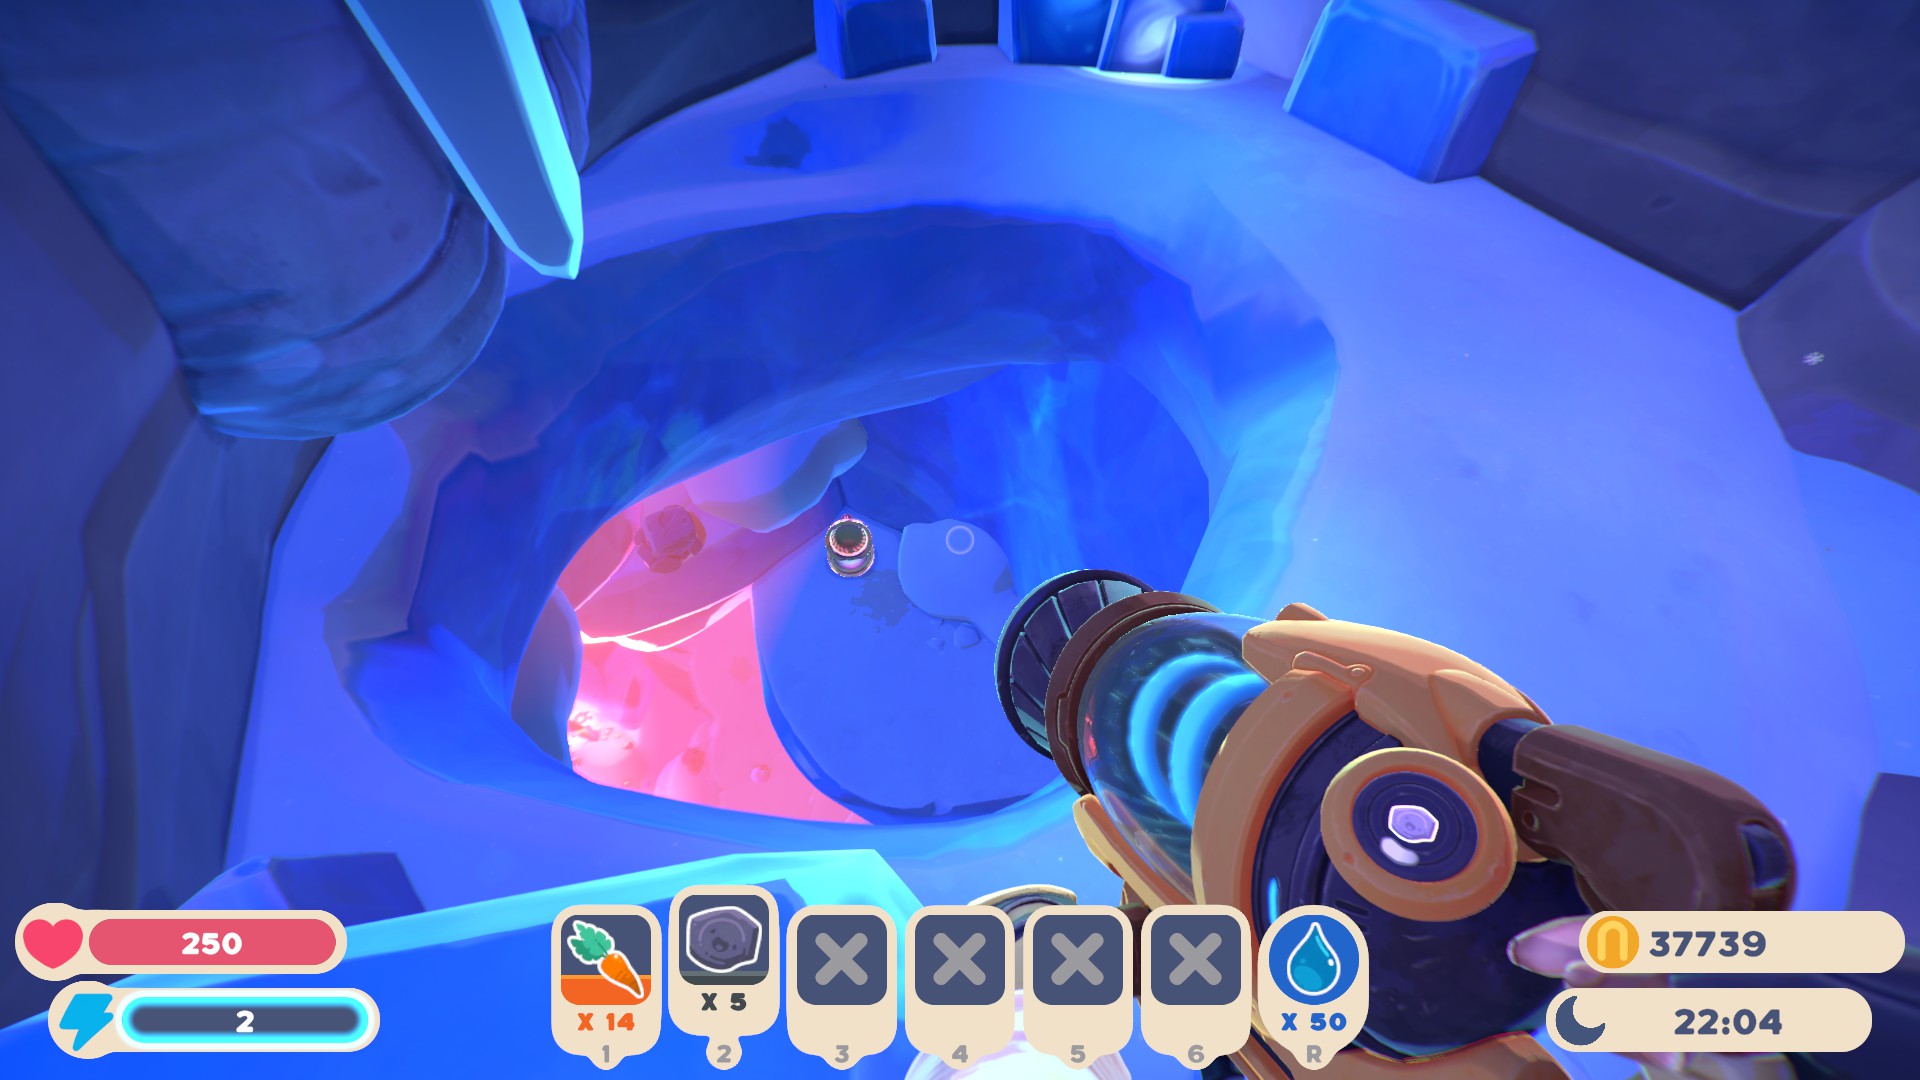 Slime Rancher 2 - Capsule Locations for Powderfall Bluffs - Pods 7 - 12 (Underground) - 2FF33B1